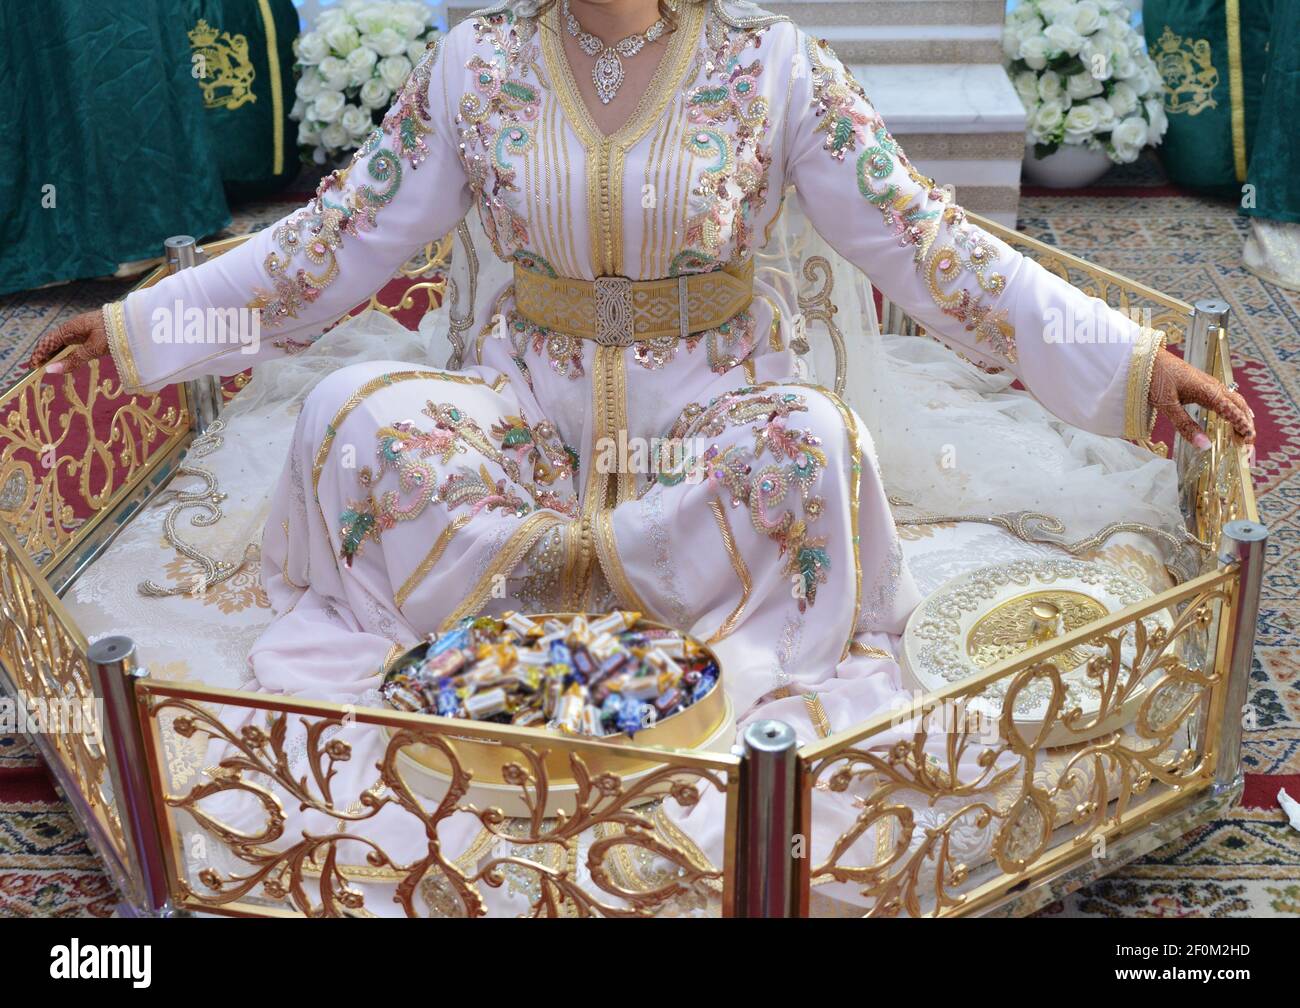 Moroccan bride dress. Wedding traditions in the Maghreb. Moroccan caftan  Stock Photo - Alamy